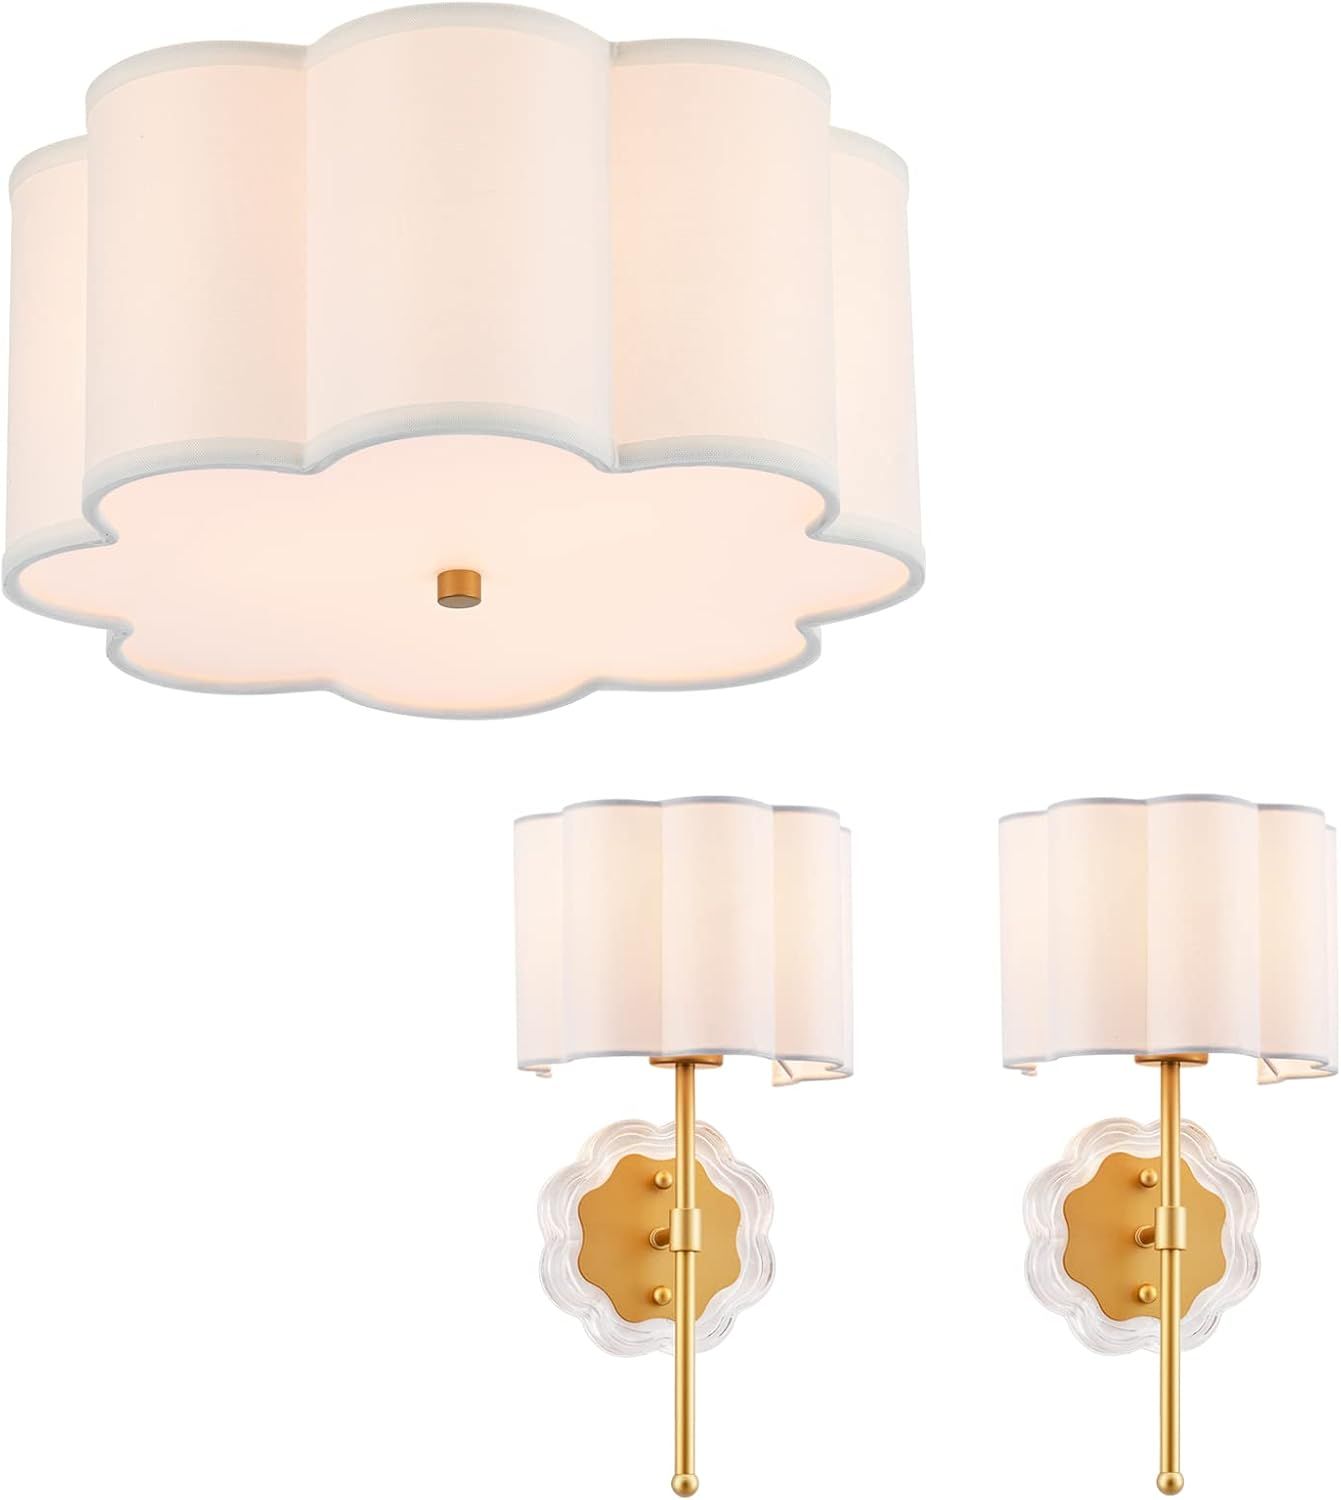 MhyTogn Item Flower-Shaped Fabric Drum Ceiling Light and Item Wall Sconce Set of 2 Bundle | Amazon (US)